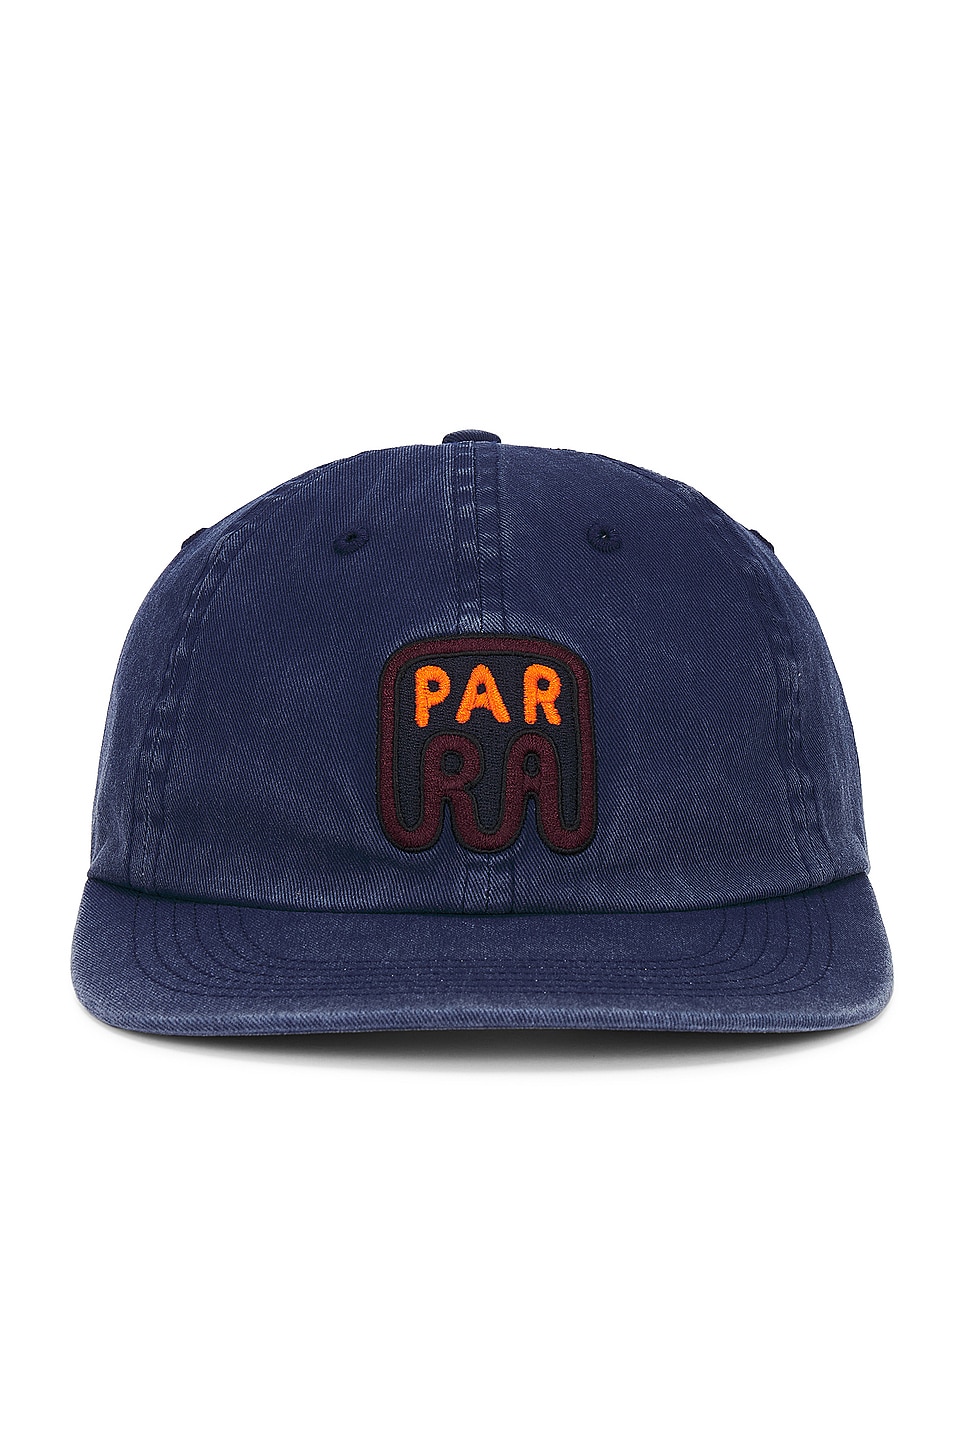 Fast Food Logo 6 Panel Hat in Navy